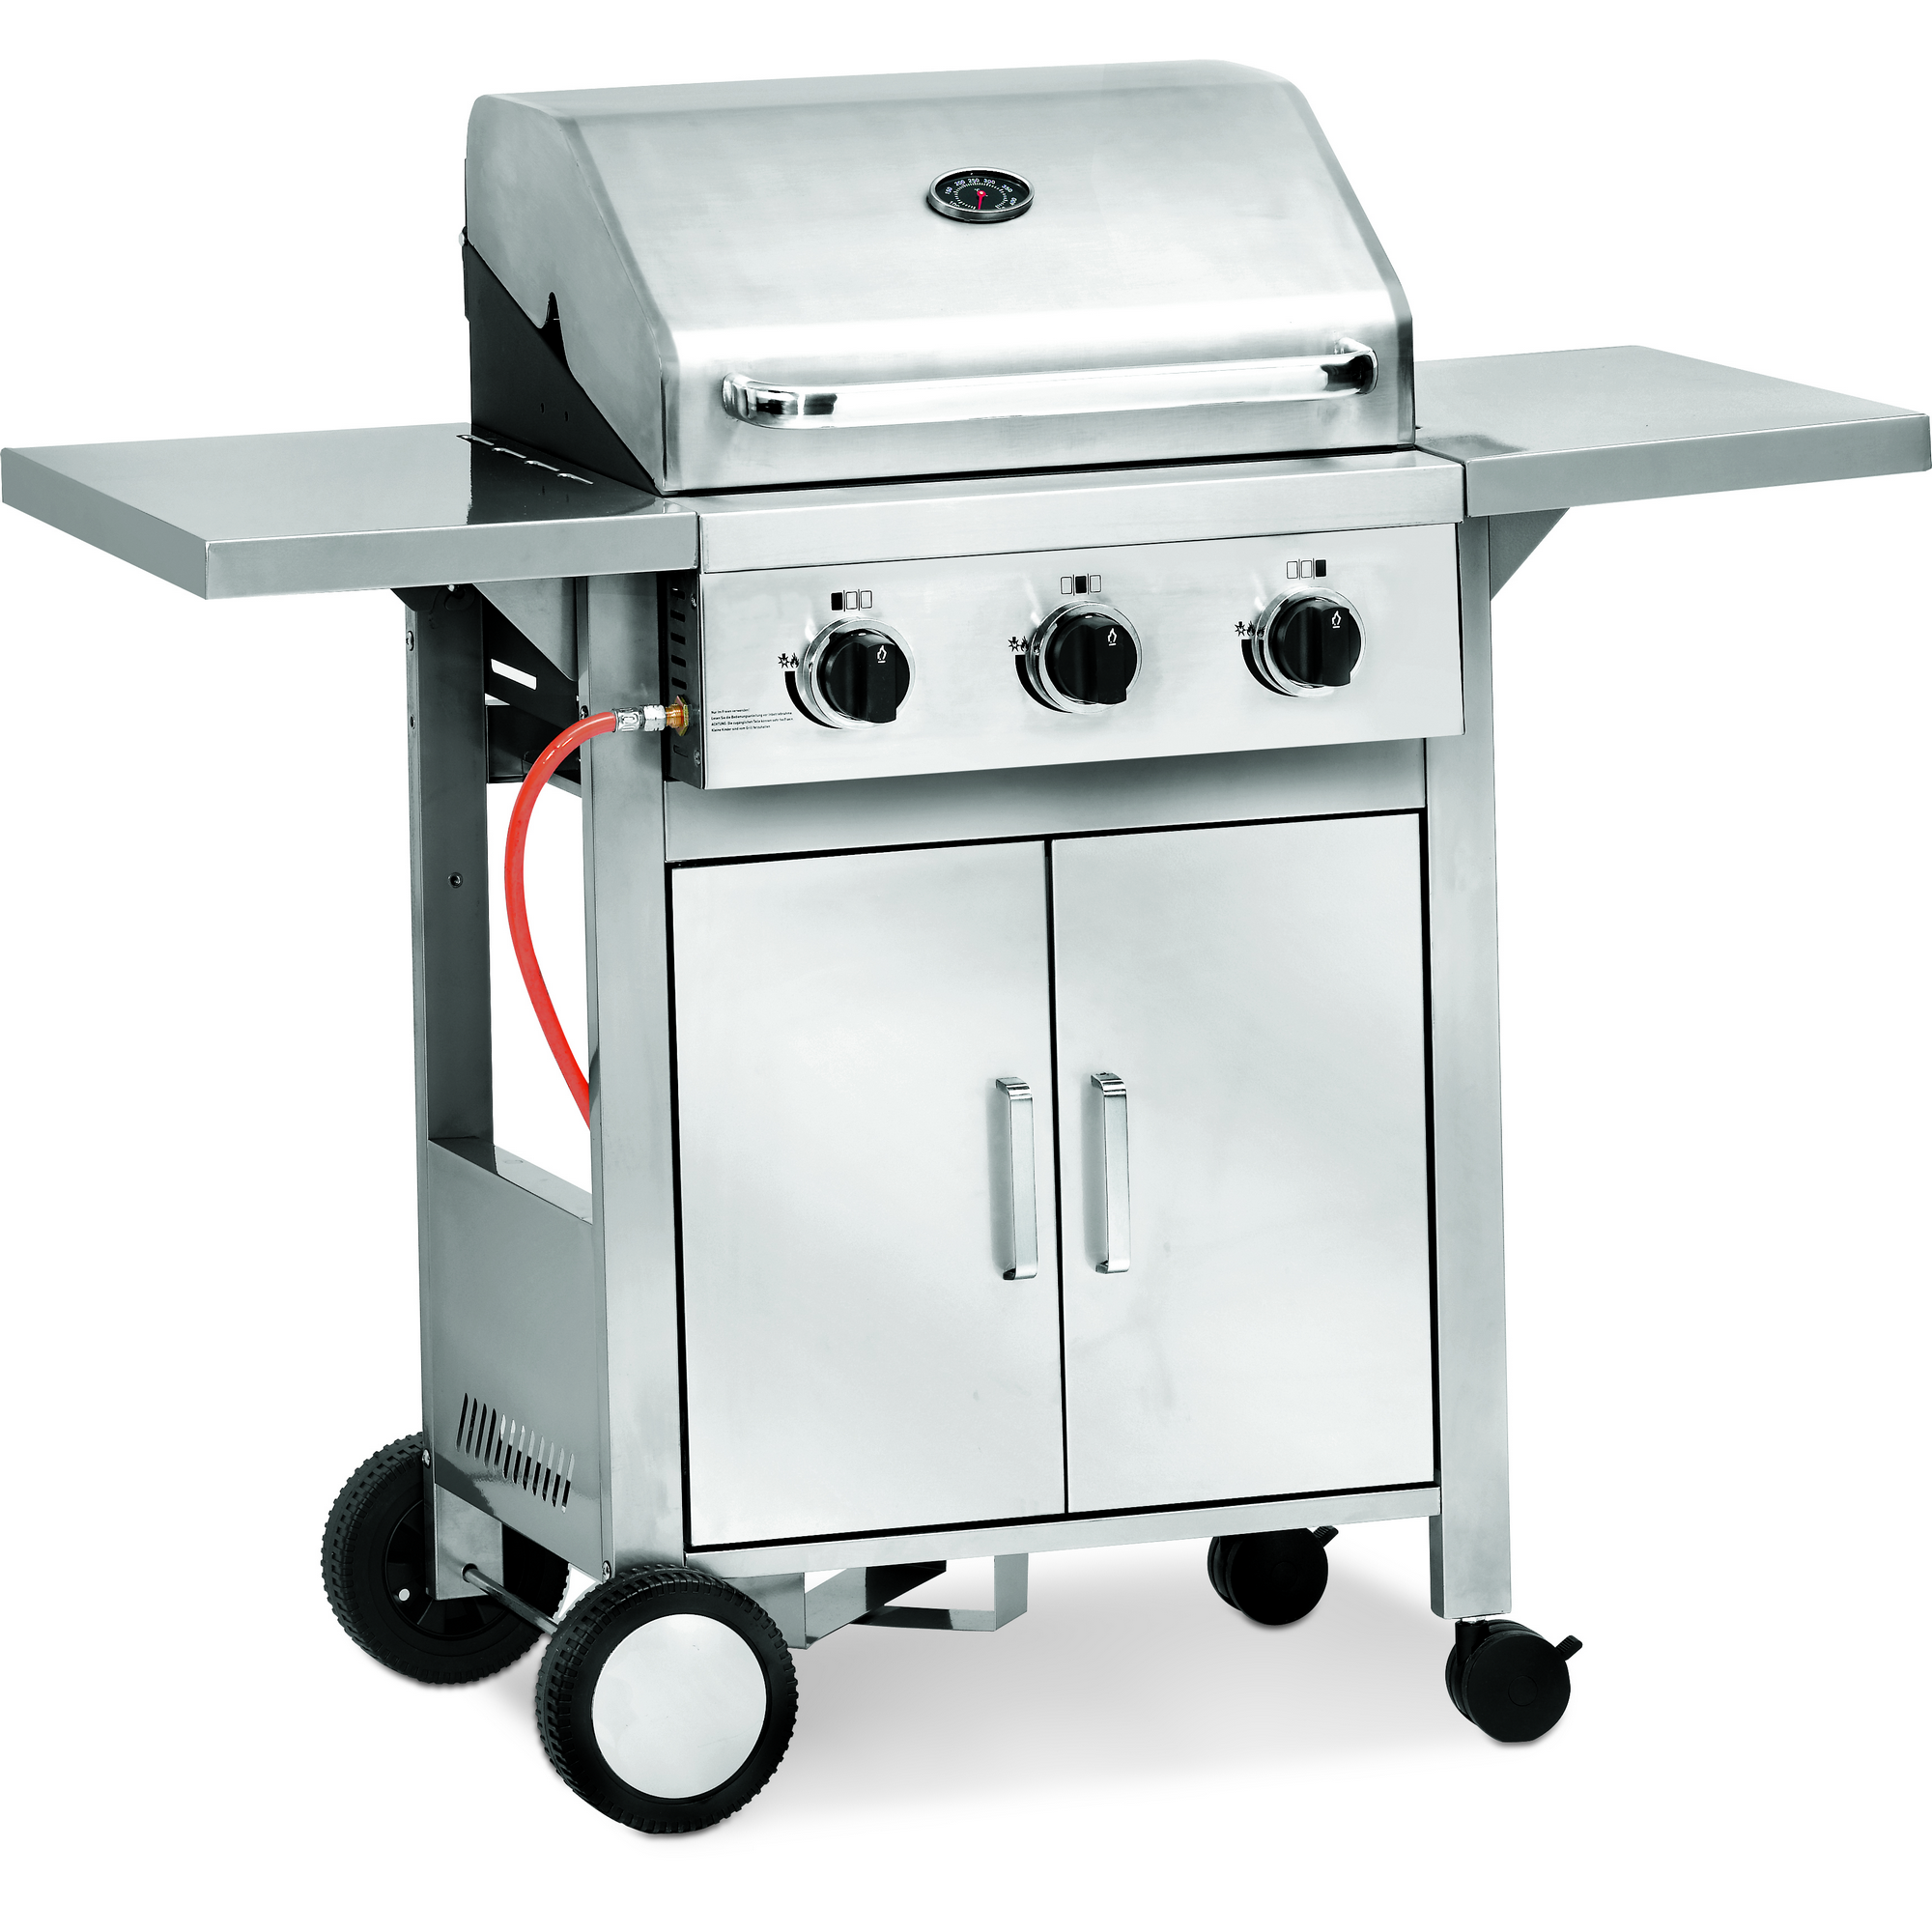 Gasgrillküche + product picture